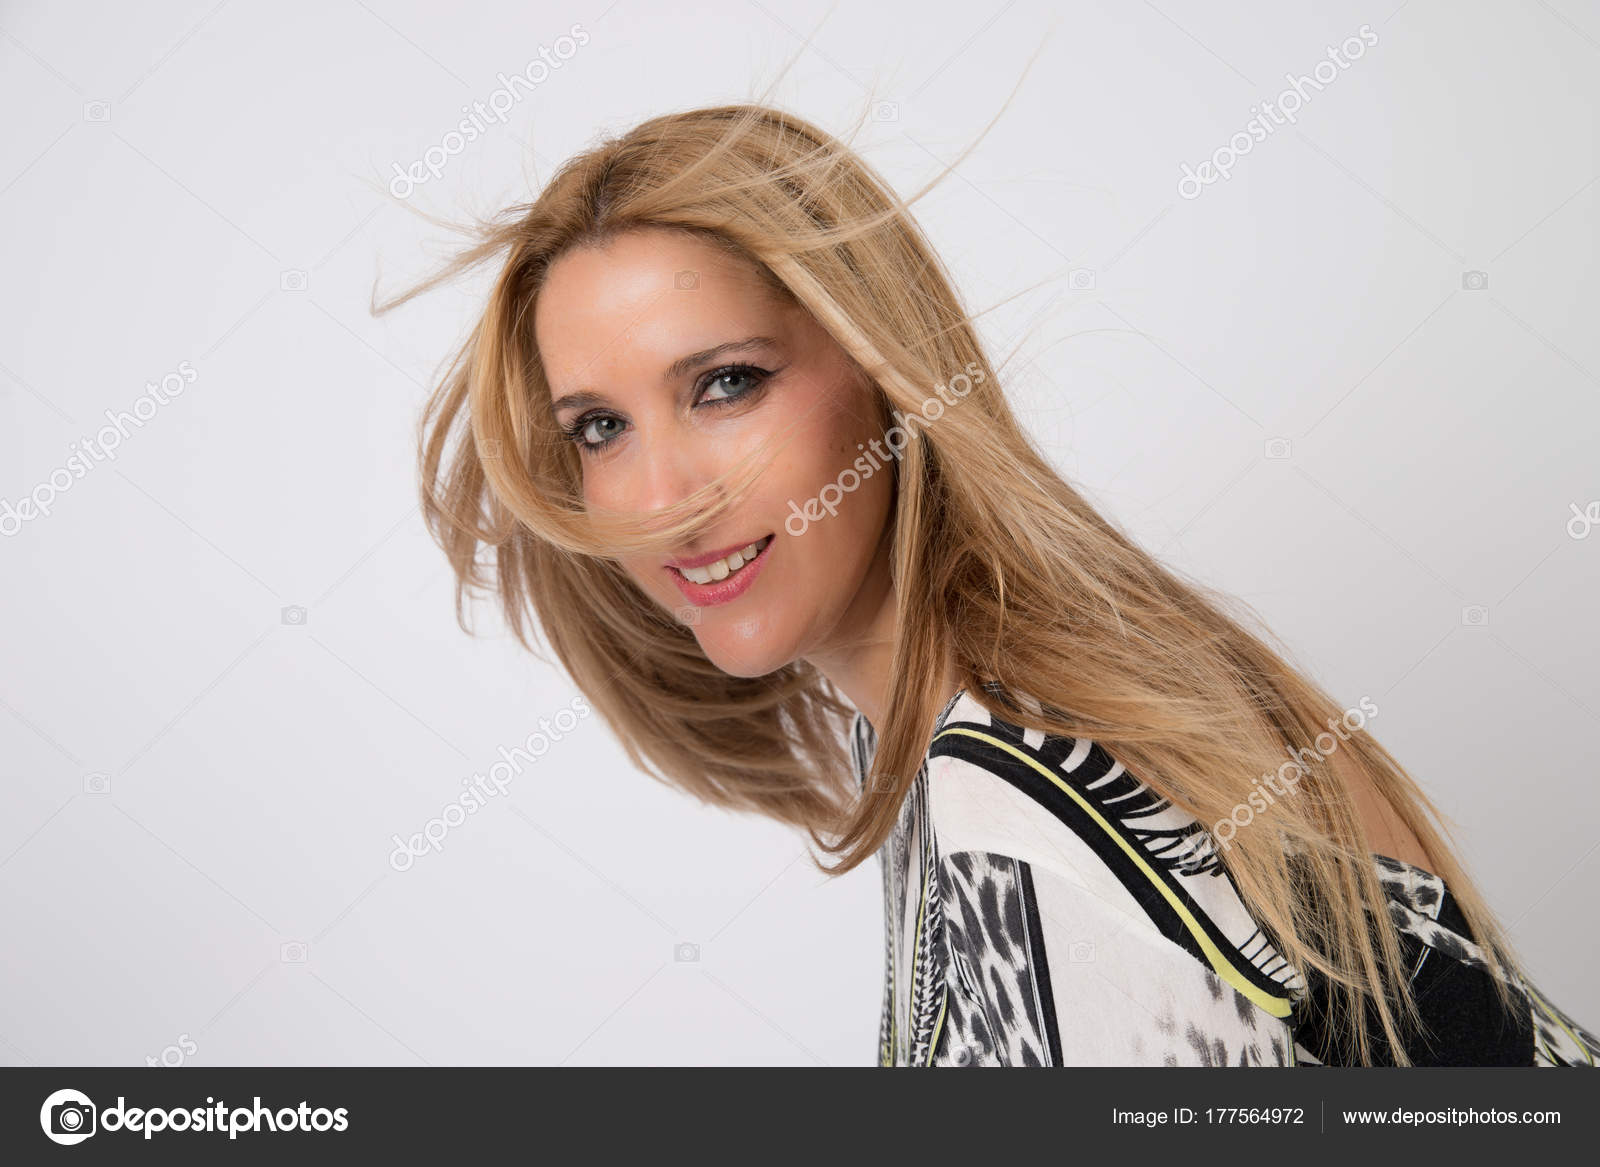 Woman With Blonde Hair And Blue Eyes In Photographic Studio